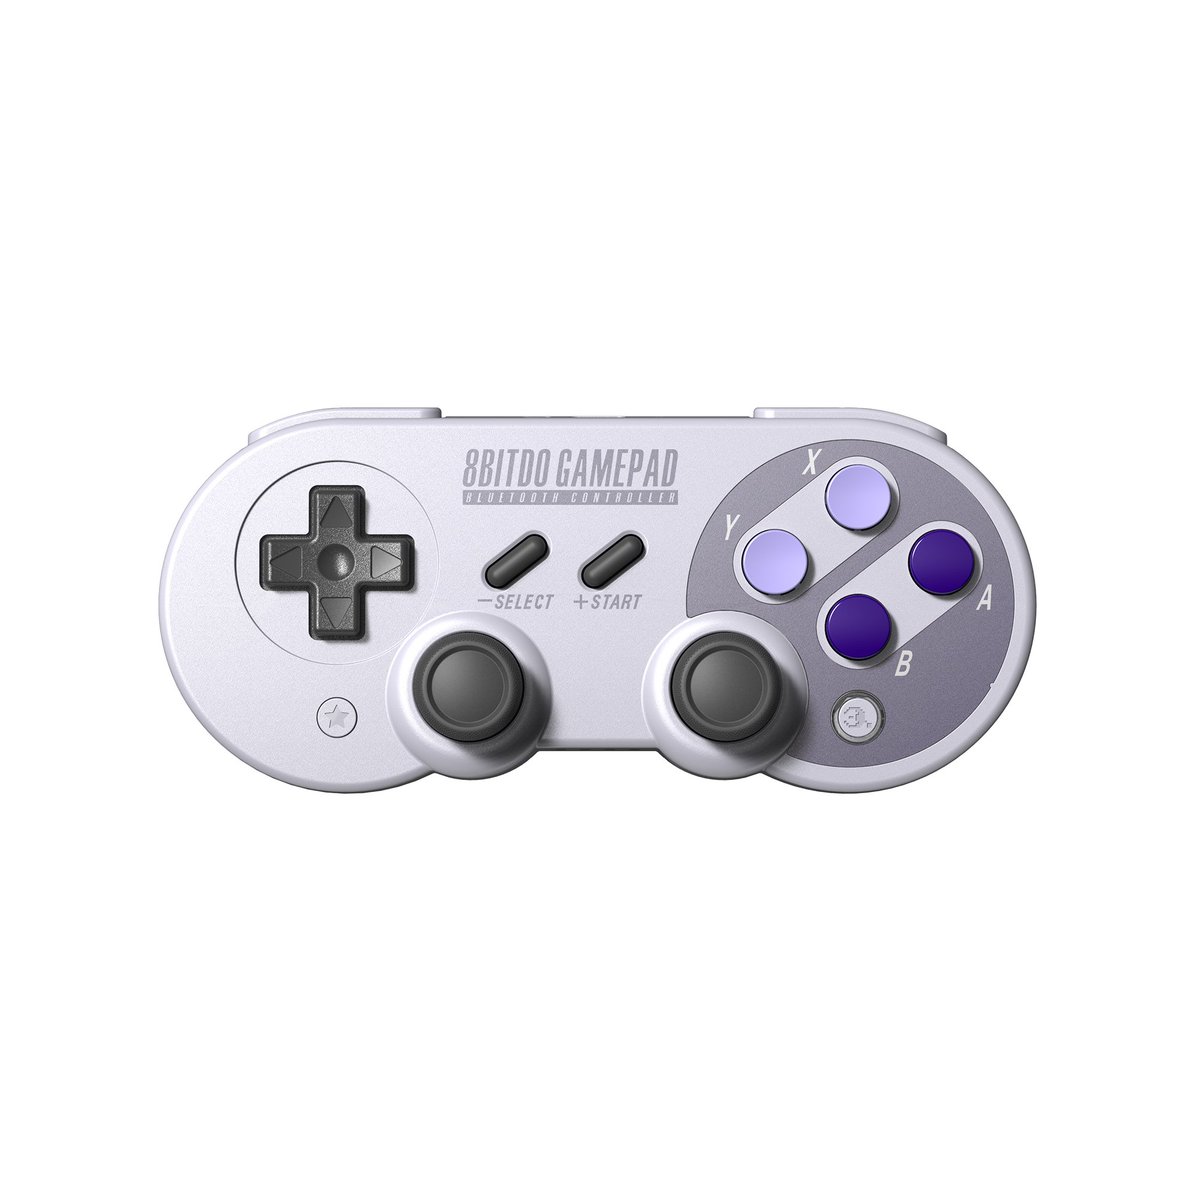 8bitdo ㆁᴗㆁ Our Sn30 Pro Has A Dedicated Home Button And A Special Star Button For Activating A Button S Turbo Mode